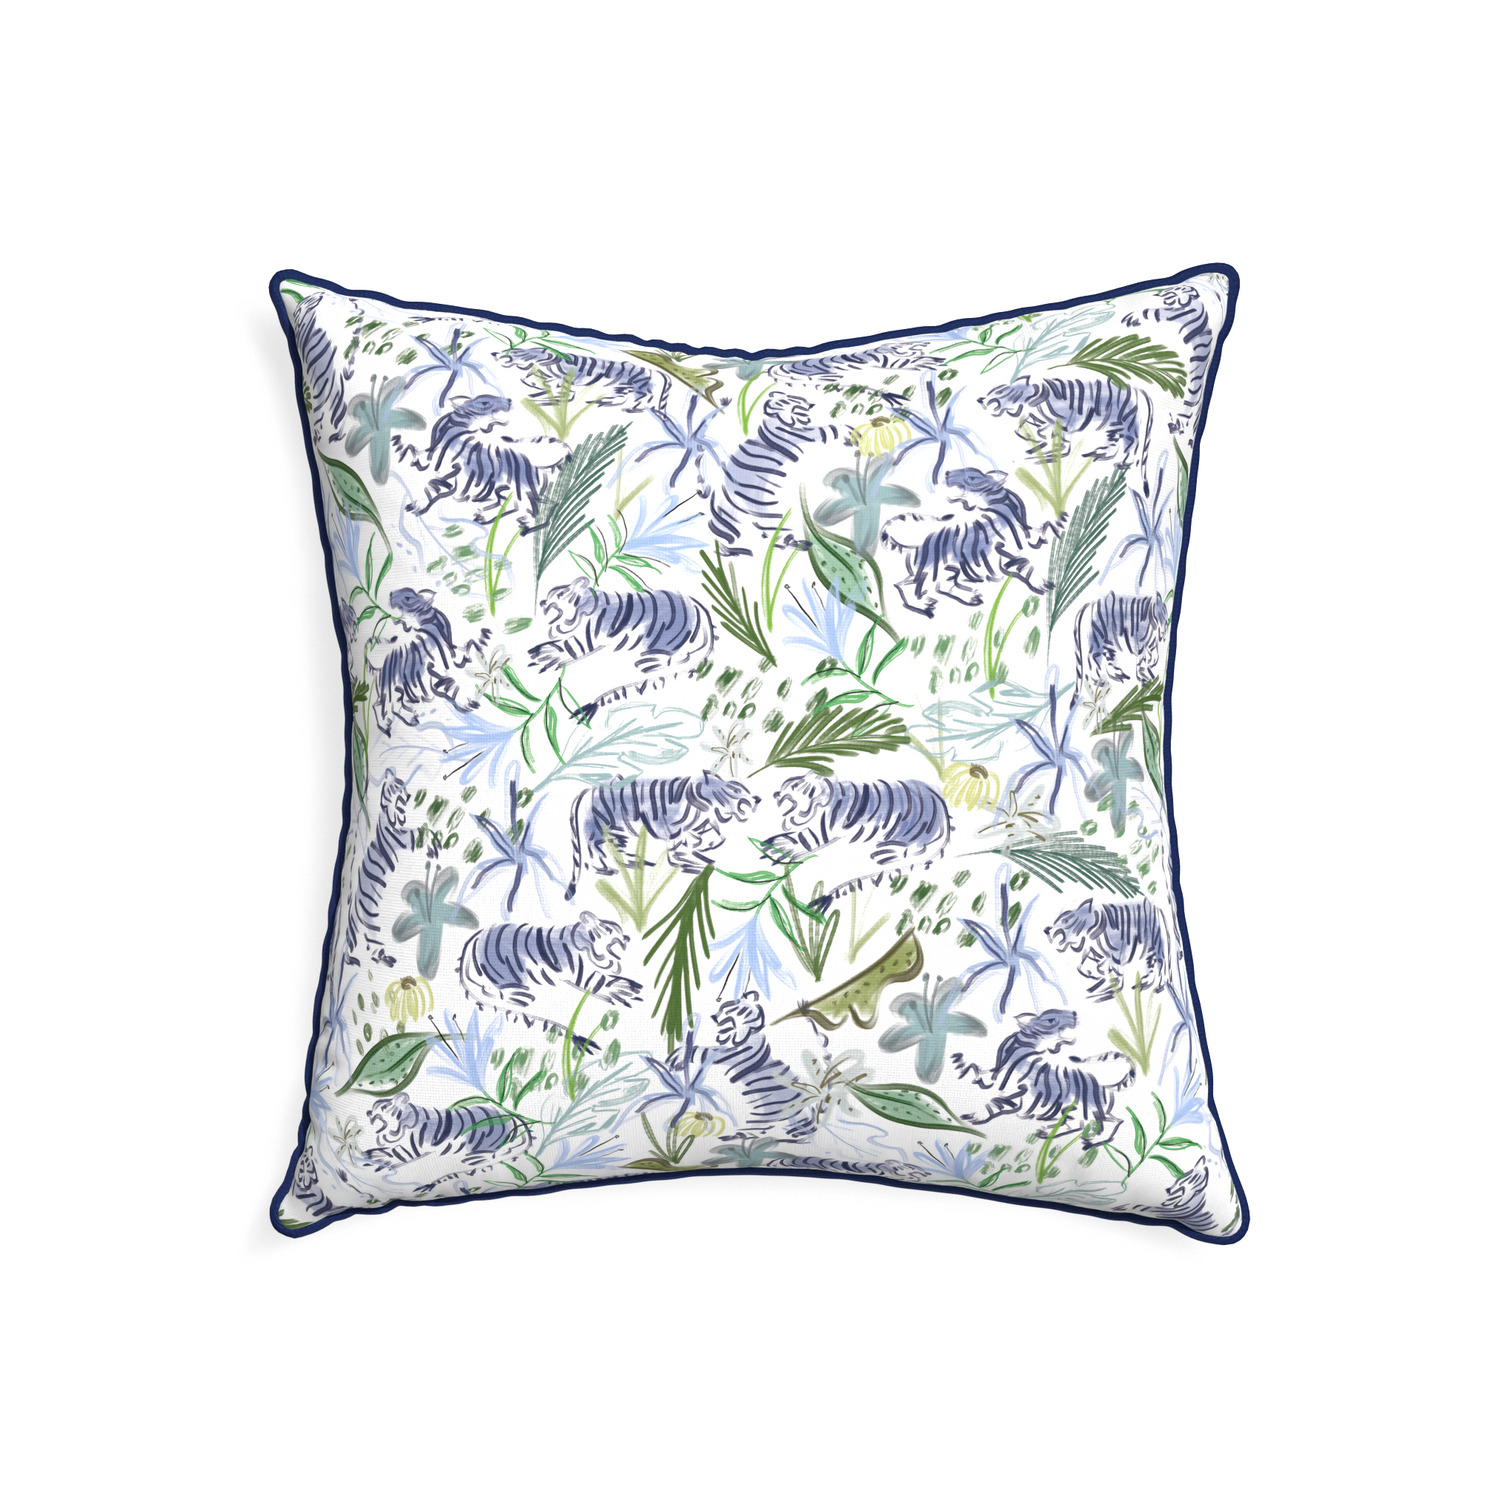 22-square frida green custom green tigerpillow with midnight piping on white background